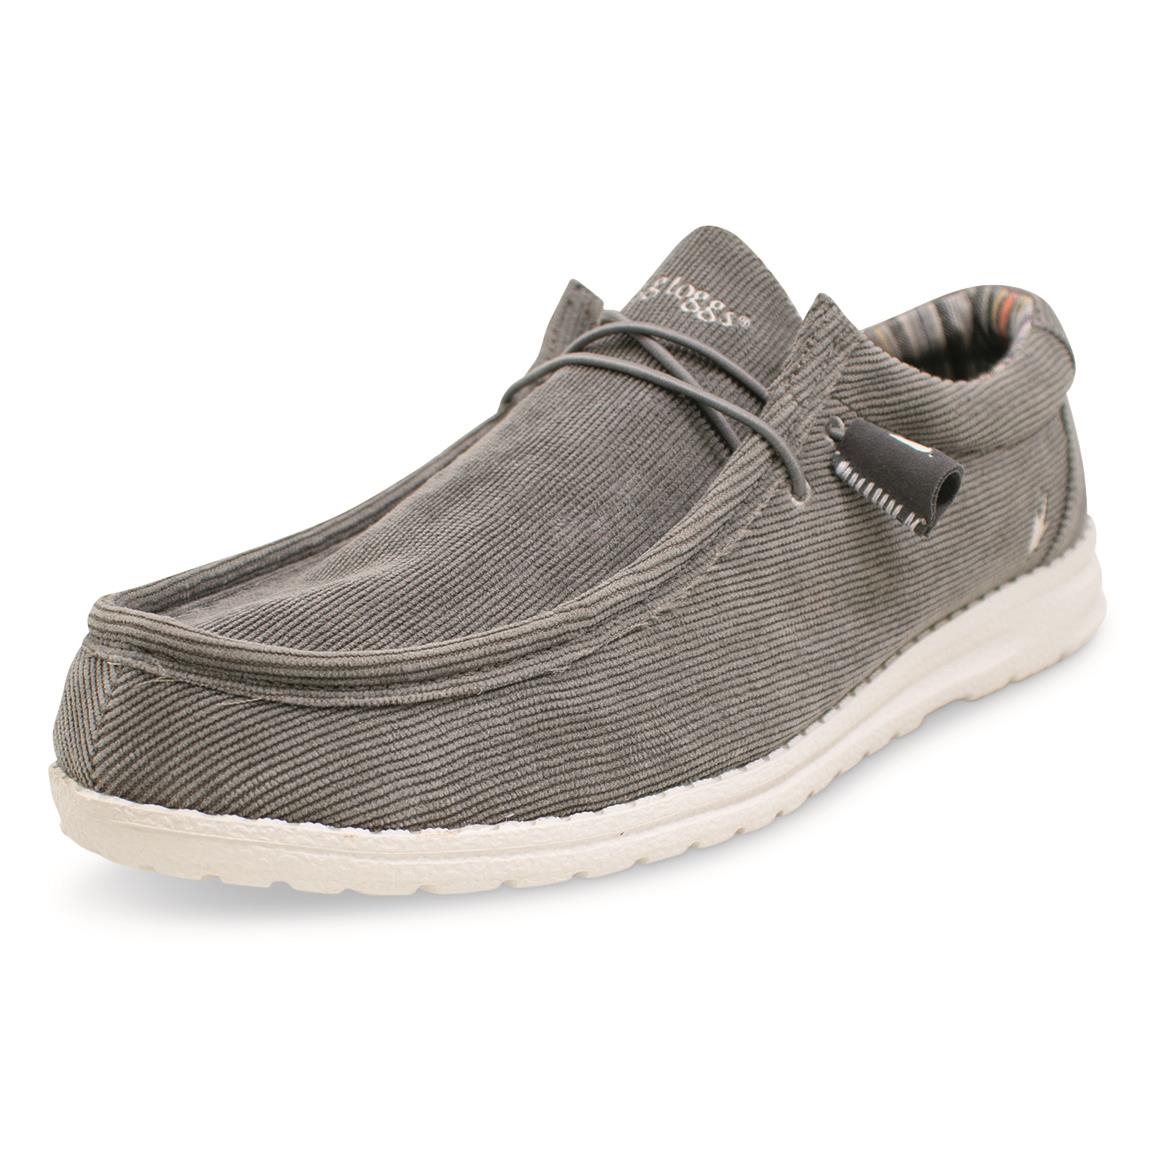 Frogg Toggs Men's Java Lace Waterproof Shoes, Light Gray